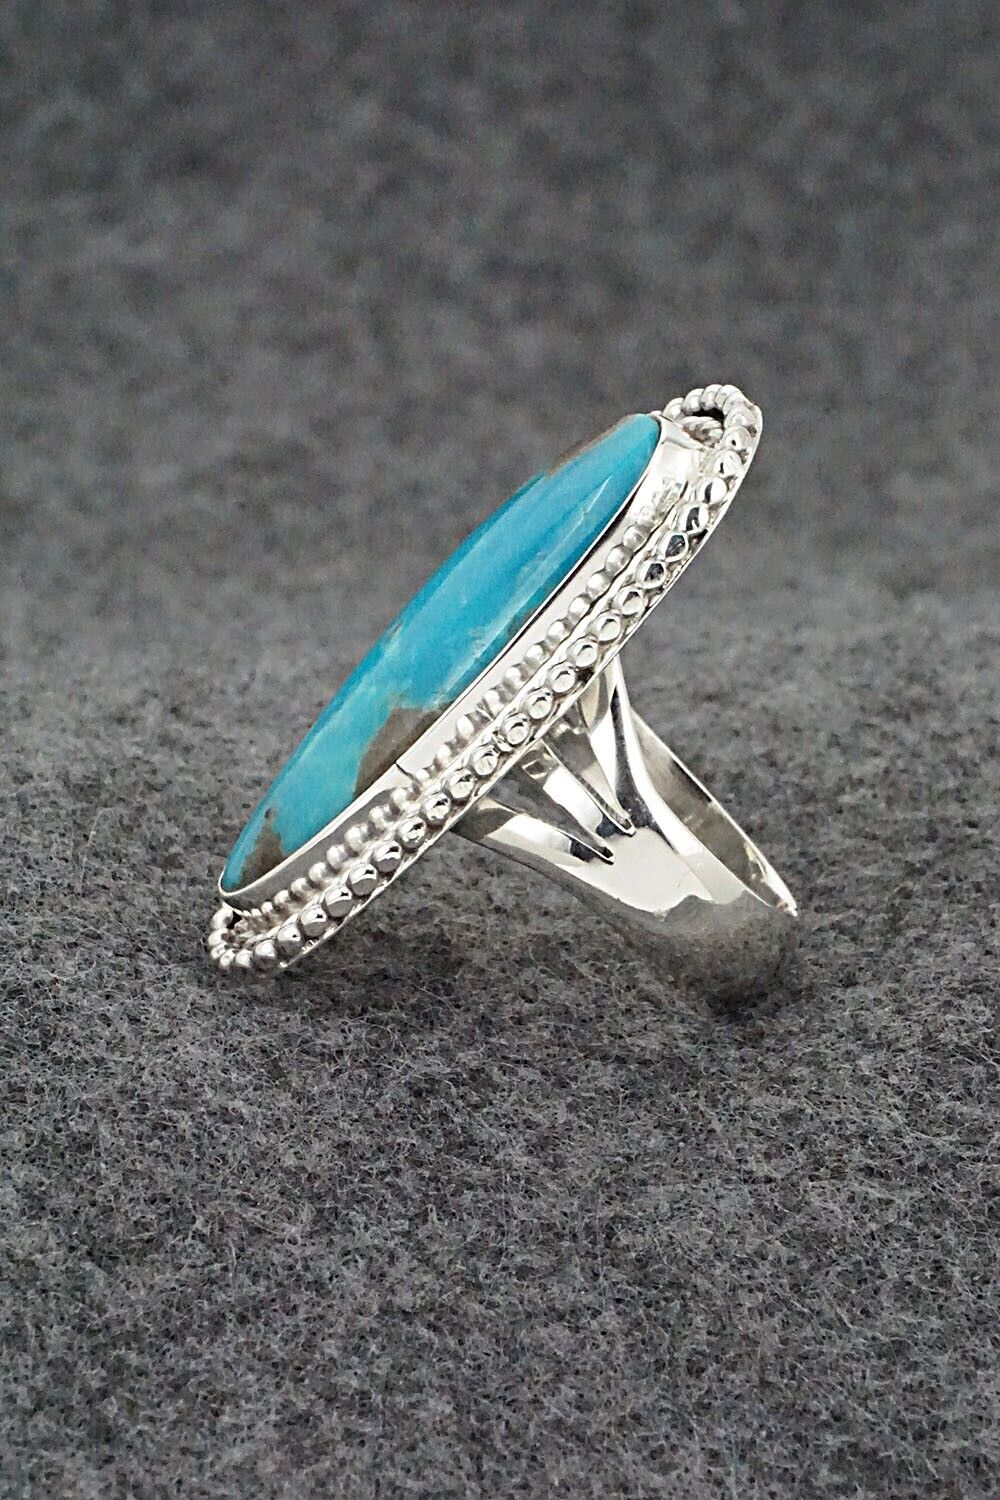 Turquoise & Sterling Silver Ring - Andrew Vandever - Size 8